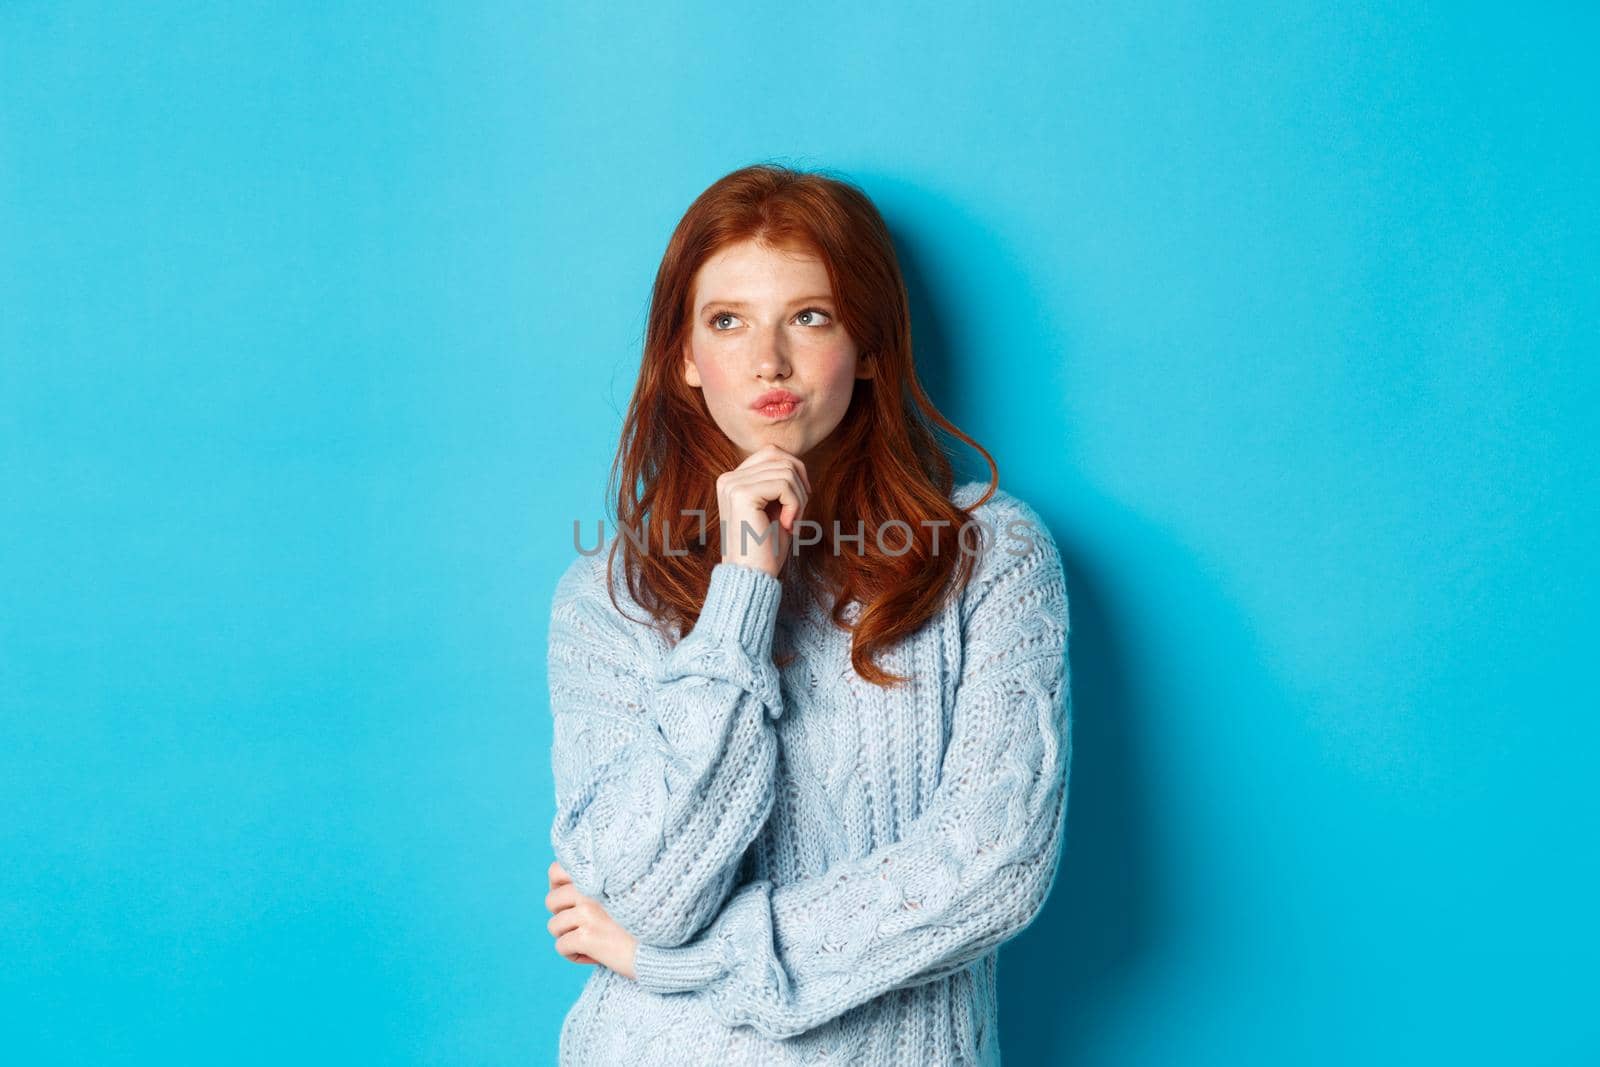 Pretty teenage girl with red hair thinking, looking upper left corner thoughtful, pondering something, standing over blue background.